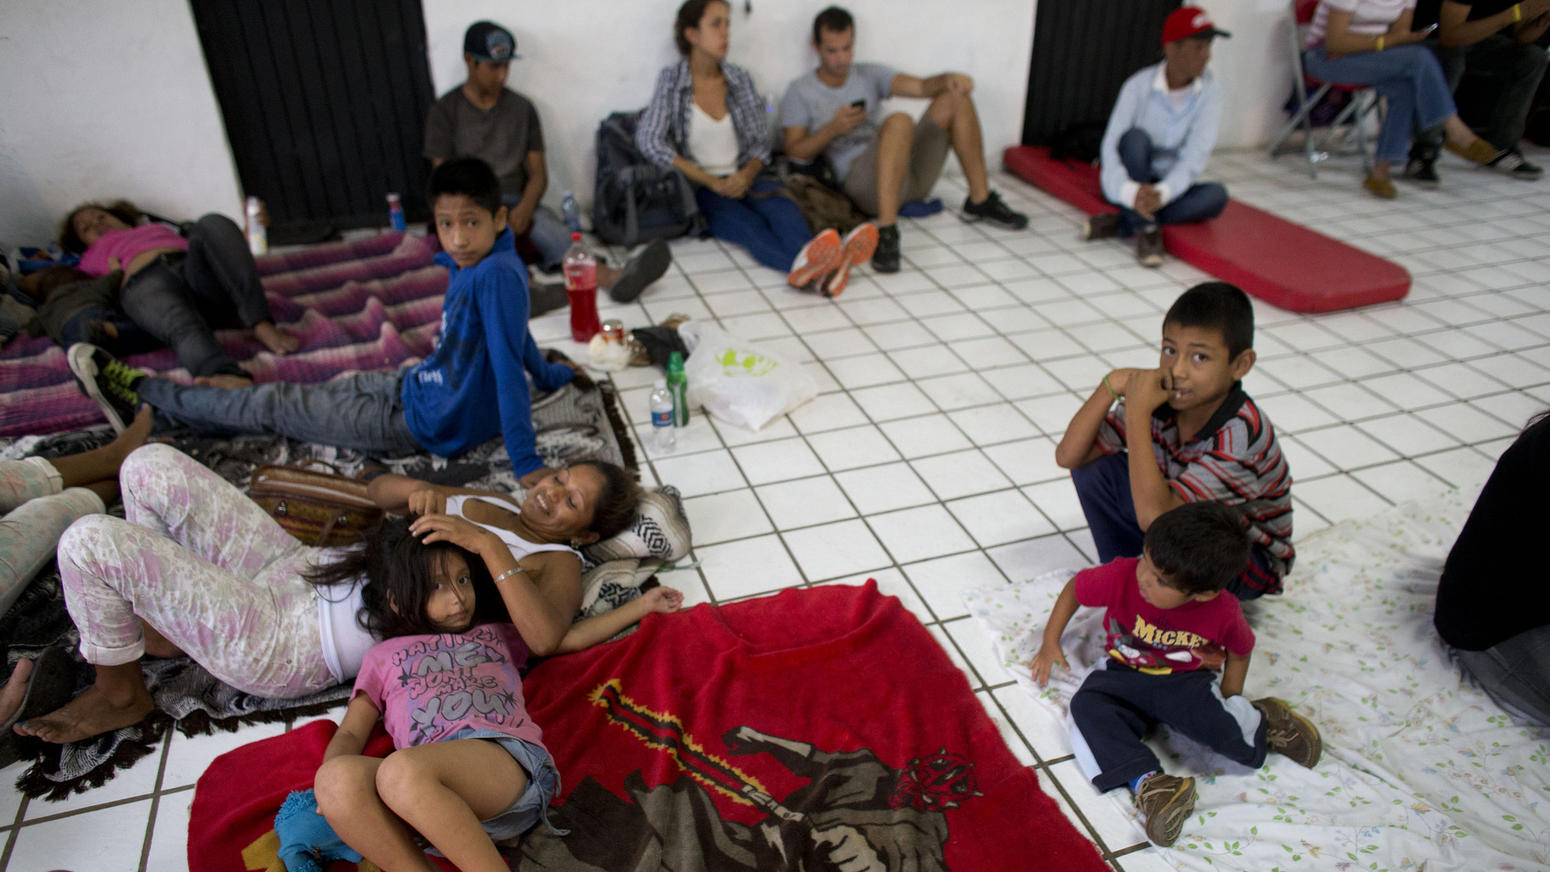 Residents and tourists took refuge in a small shelter as they awaited the arrival of the hurricane in Puerto Vallarta. (AP)